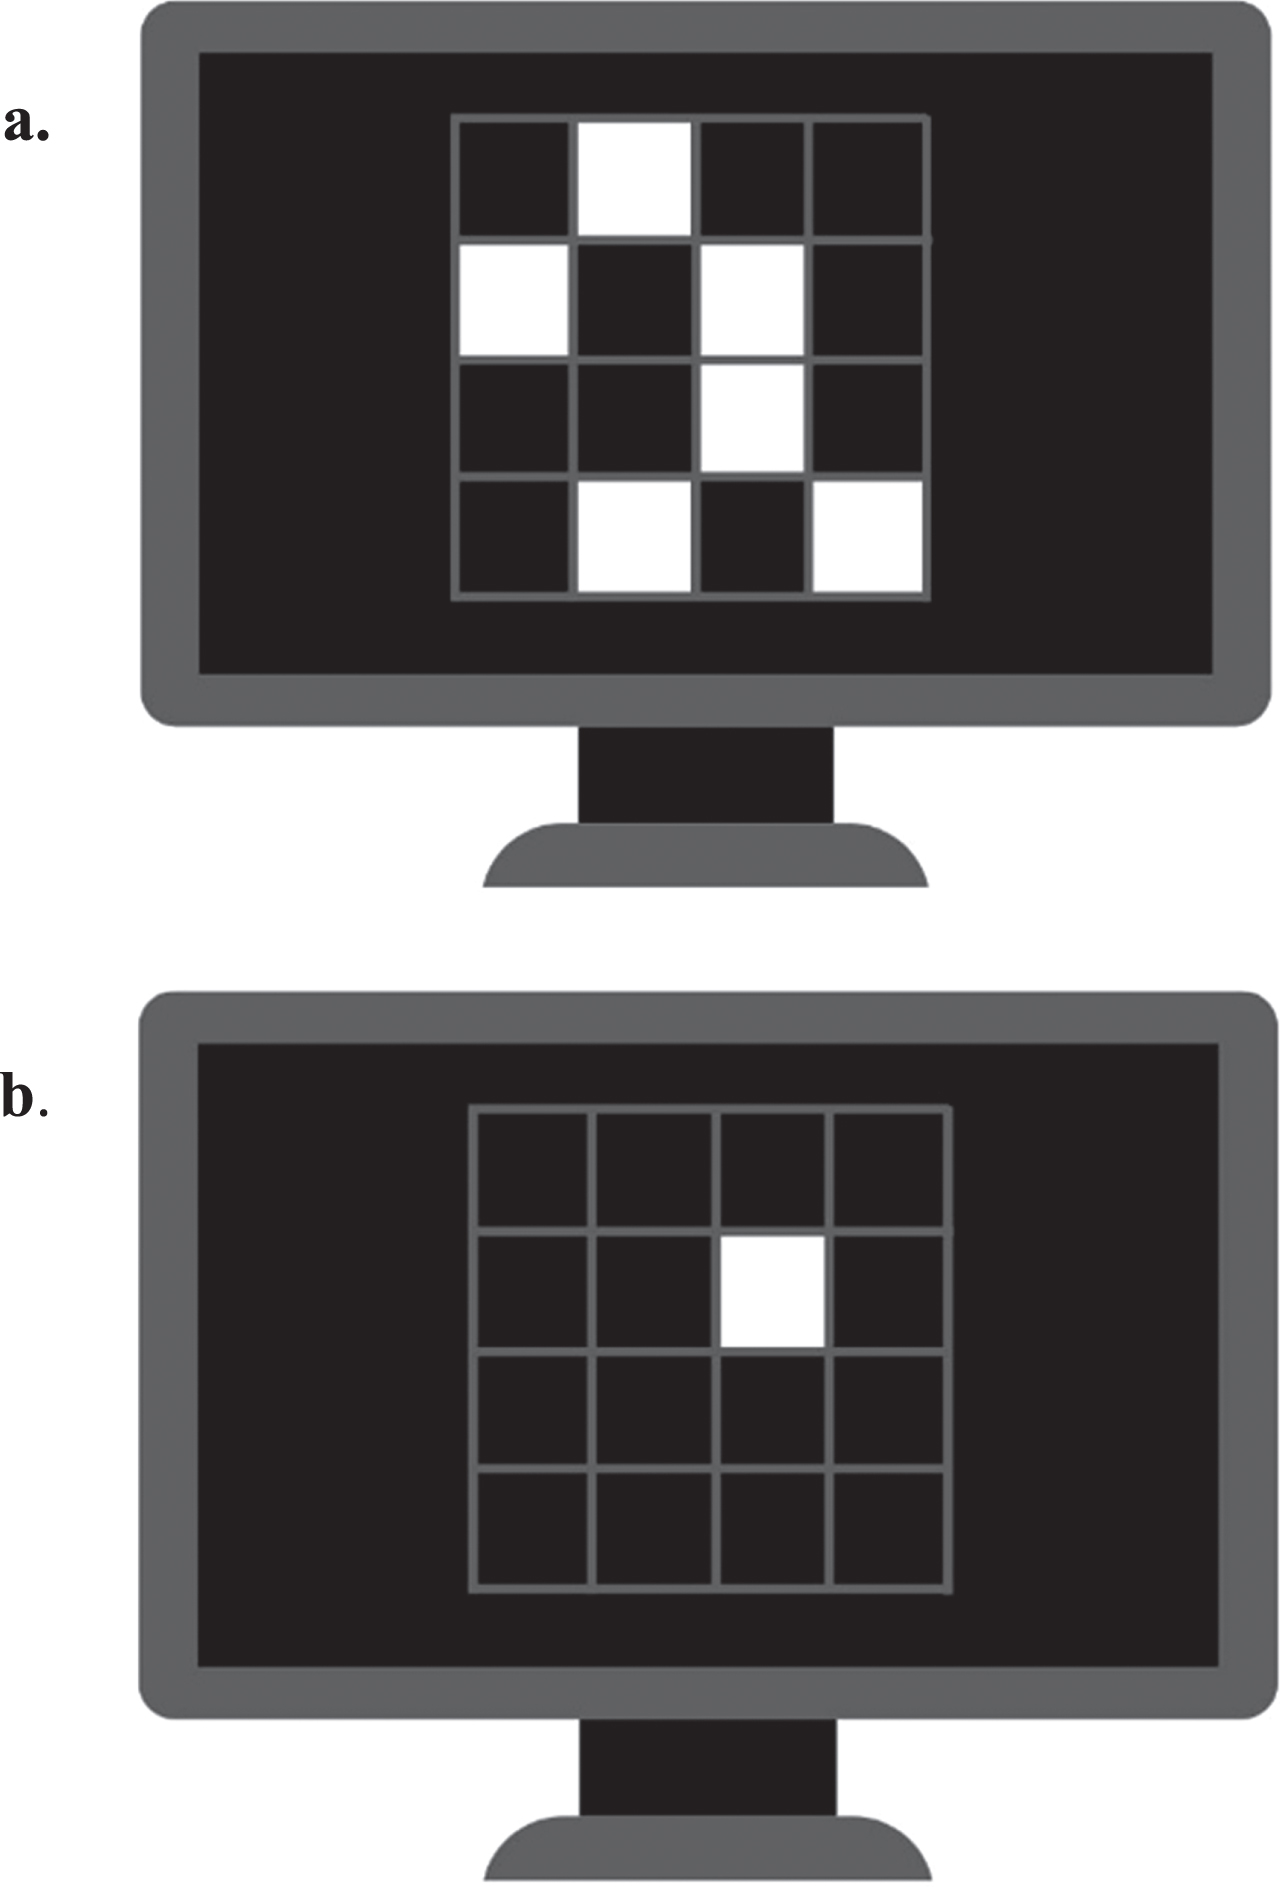 Spatial working memory task. a) The 4 x 4 grid on the screen contacting six random grid white squares. B) A single white square is presented in on the grid. Participants required to respond ‘yes’ or ‘no’ to indicate if square was in one of the locations of the original pattern.